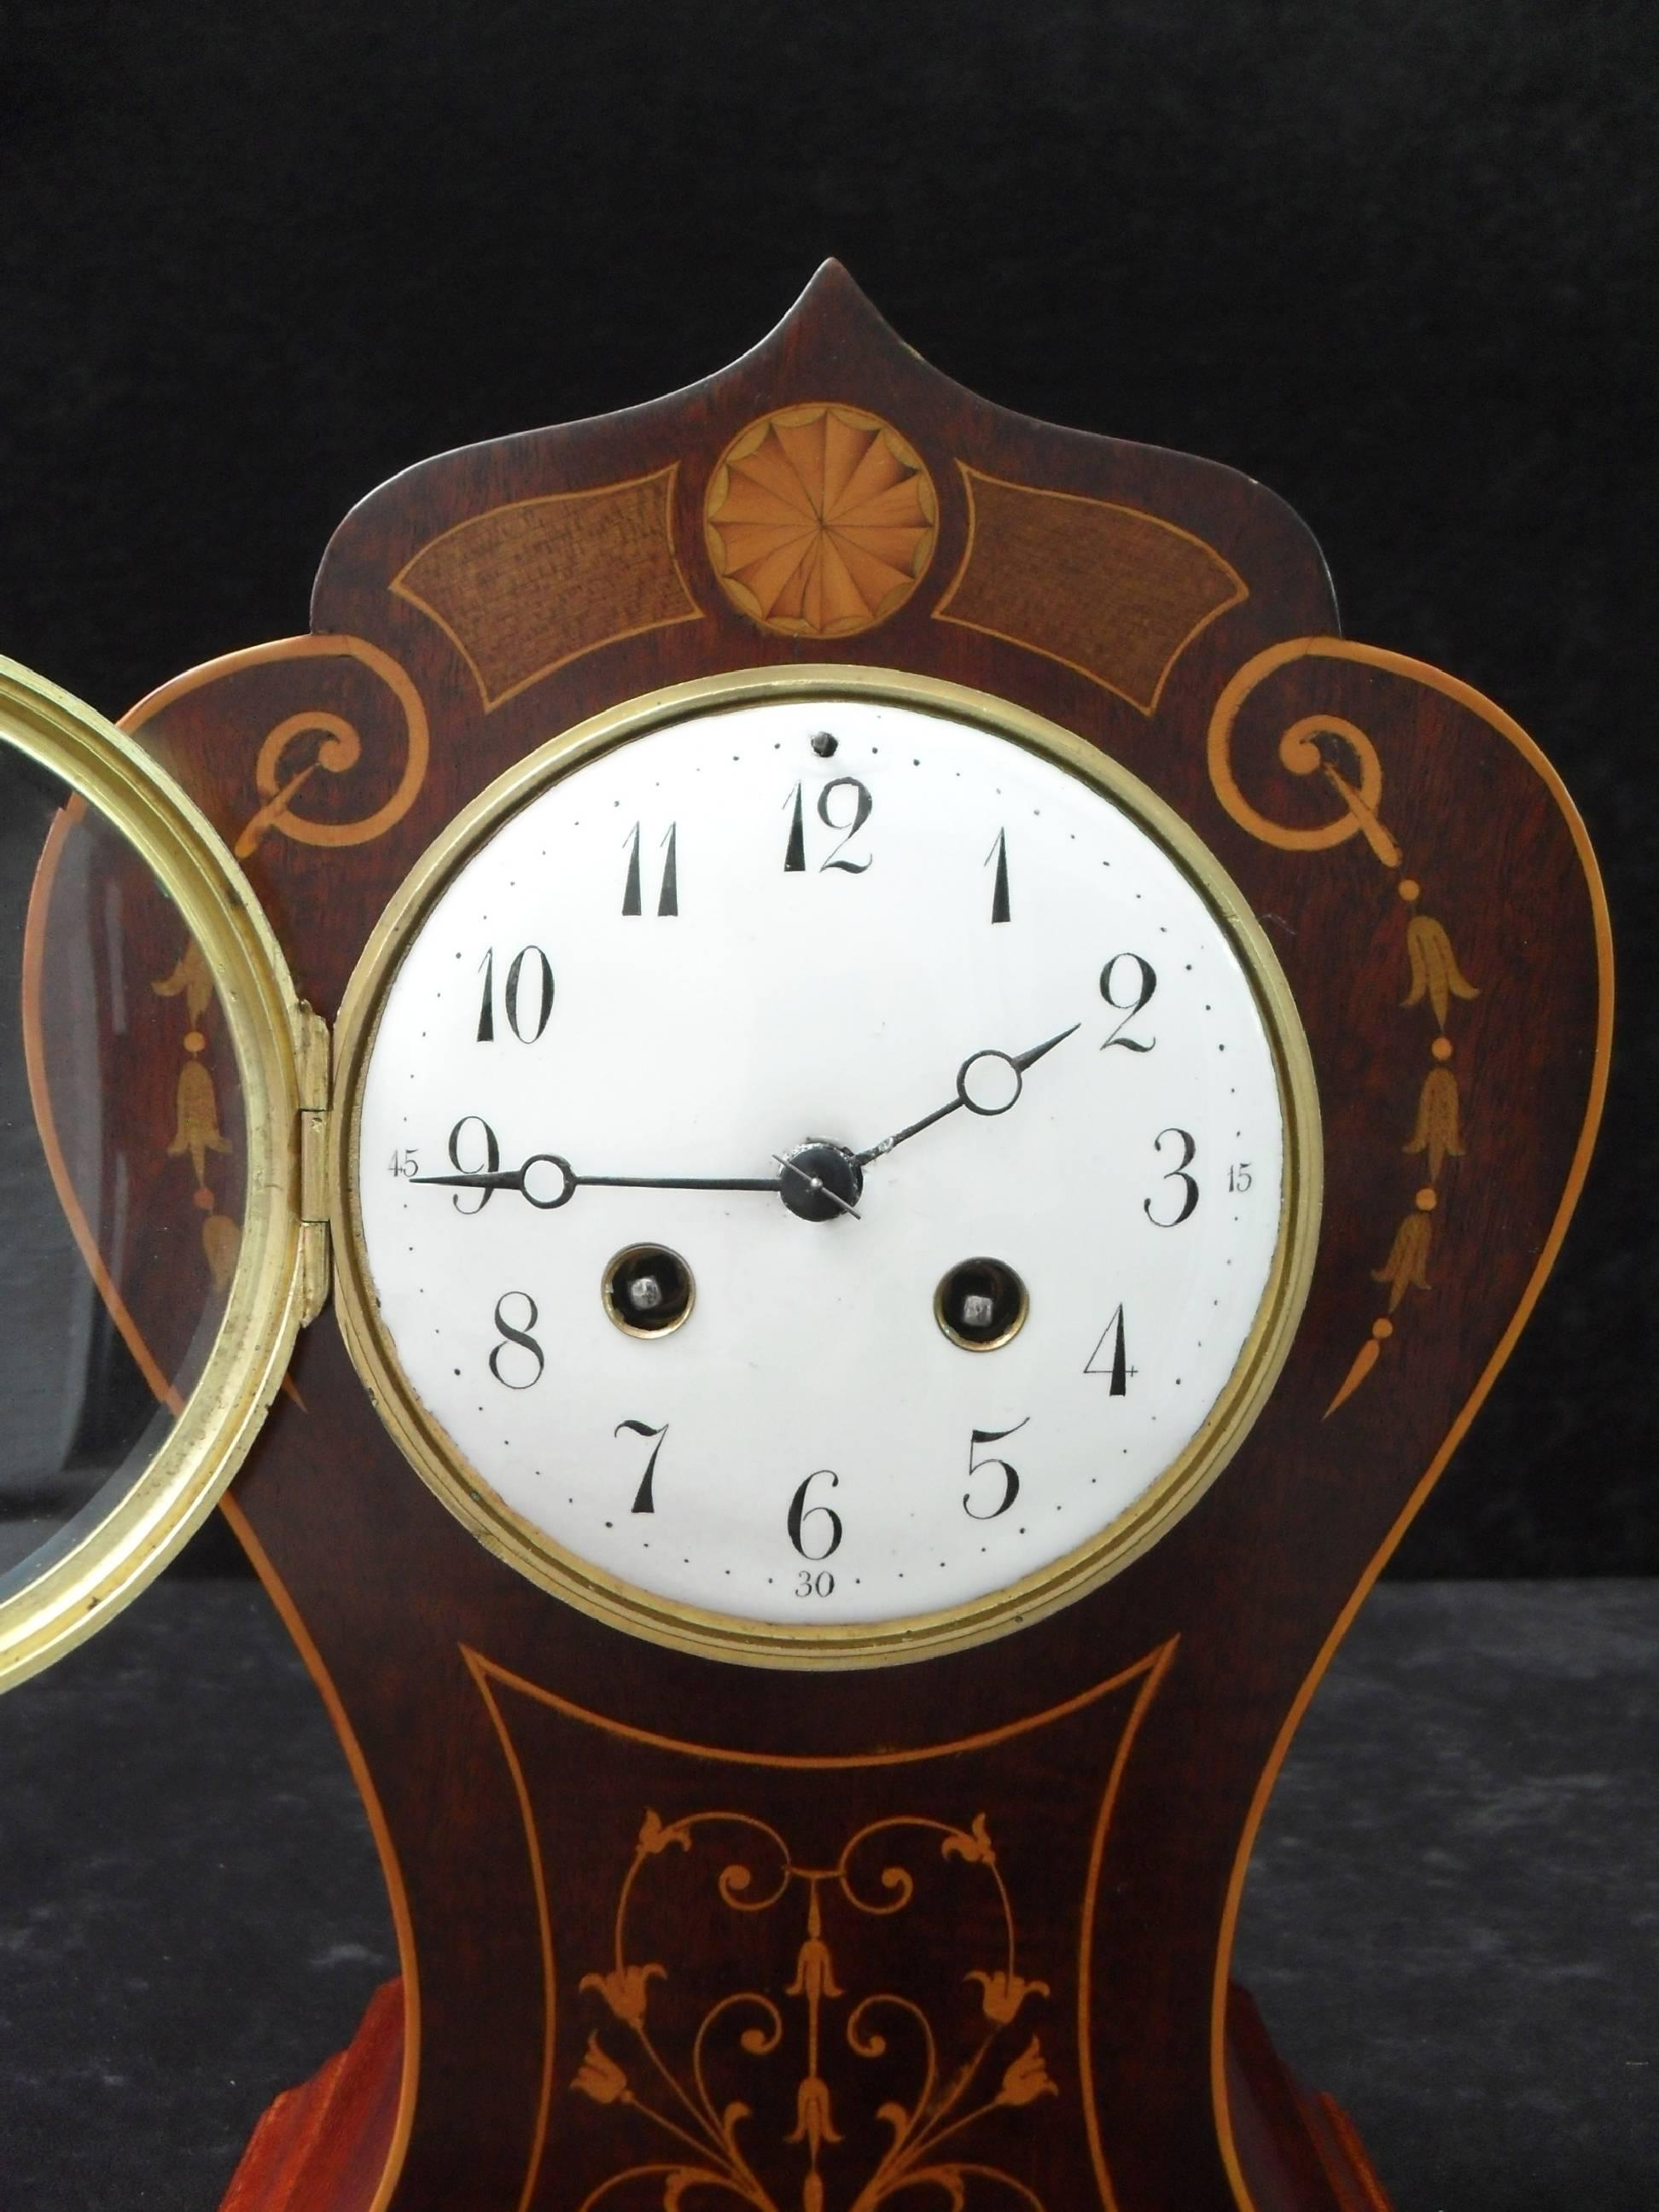 A very nice Belle Époque mahogany tulip shaped mantel clock with boxwood and coloured wood inlays and central fan to the top. The clock has a white enamel dial with a French eight day movement which strikes the hours and half hours on a gong.

The